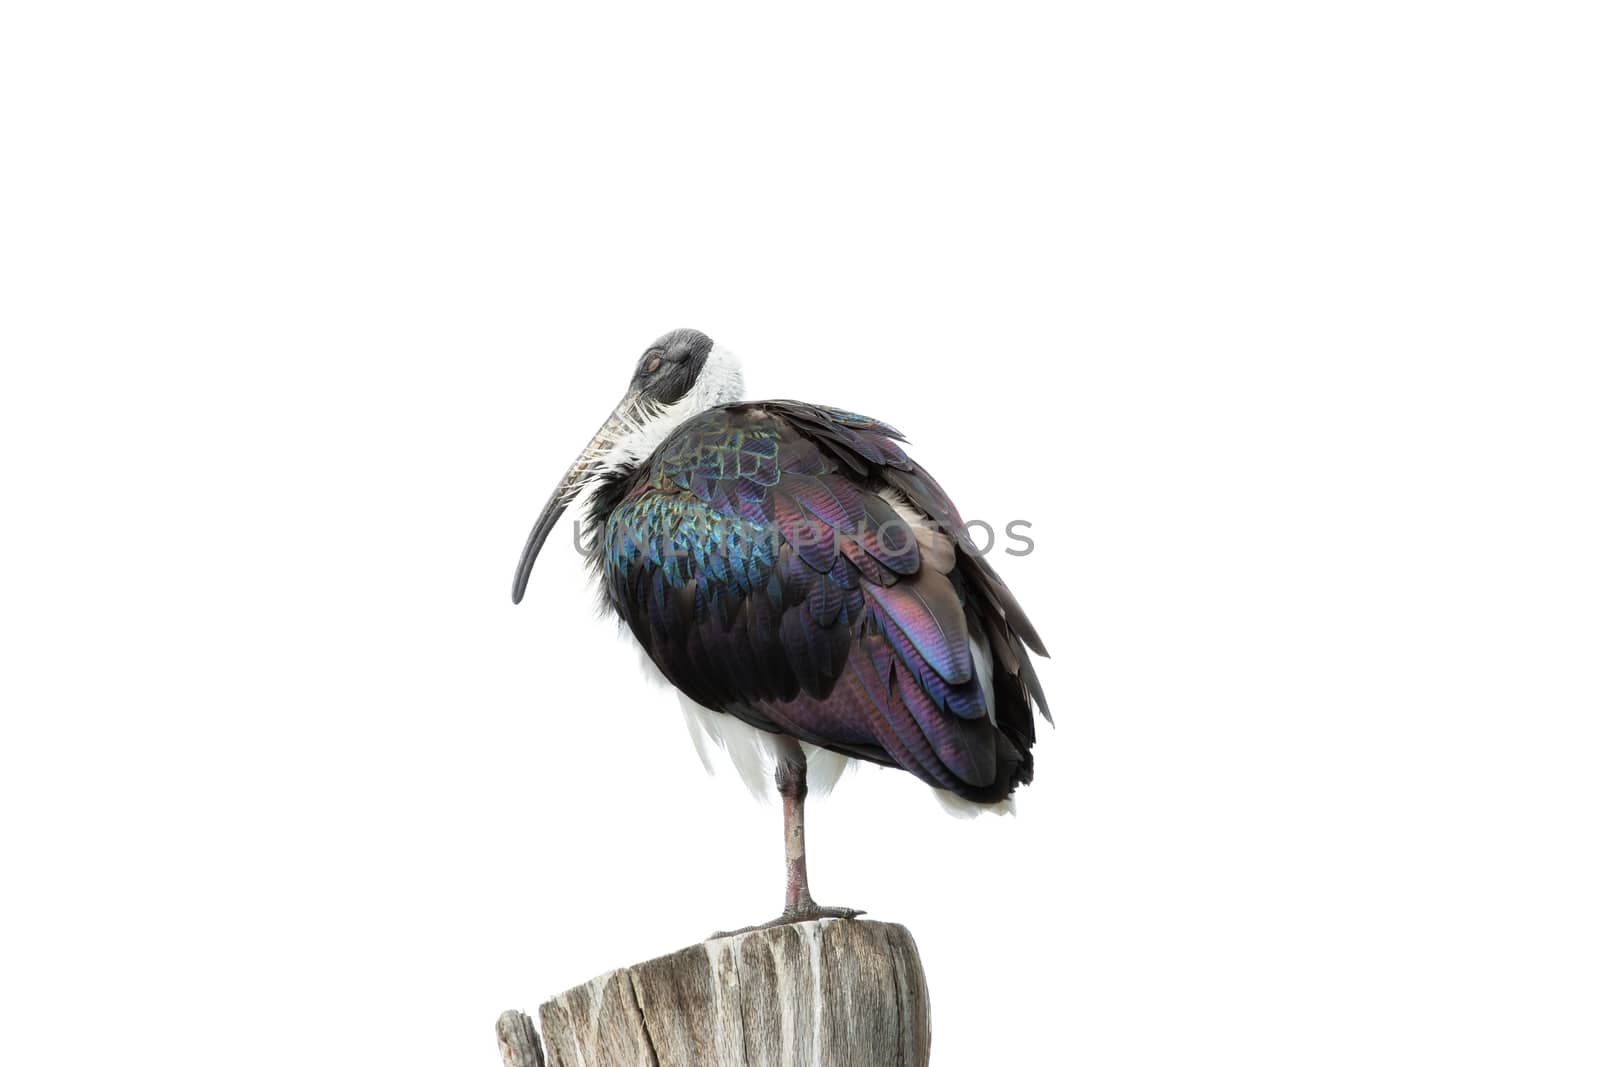 A Waldrapp on a trunk against a white background
